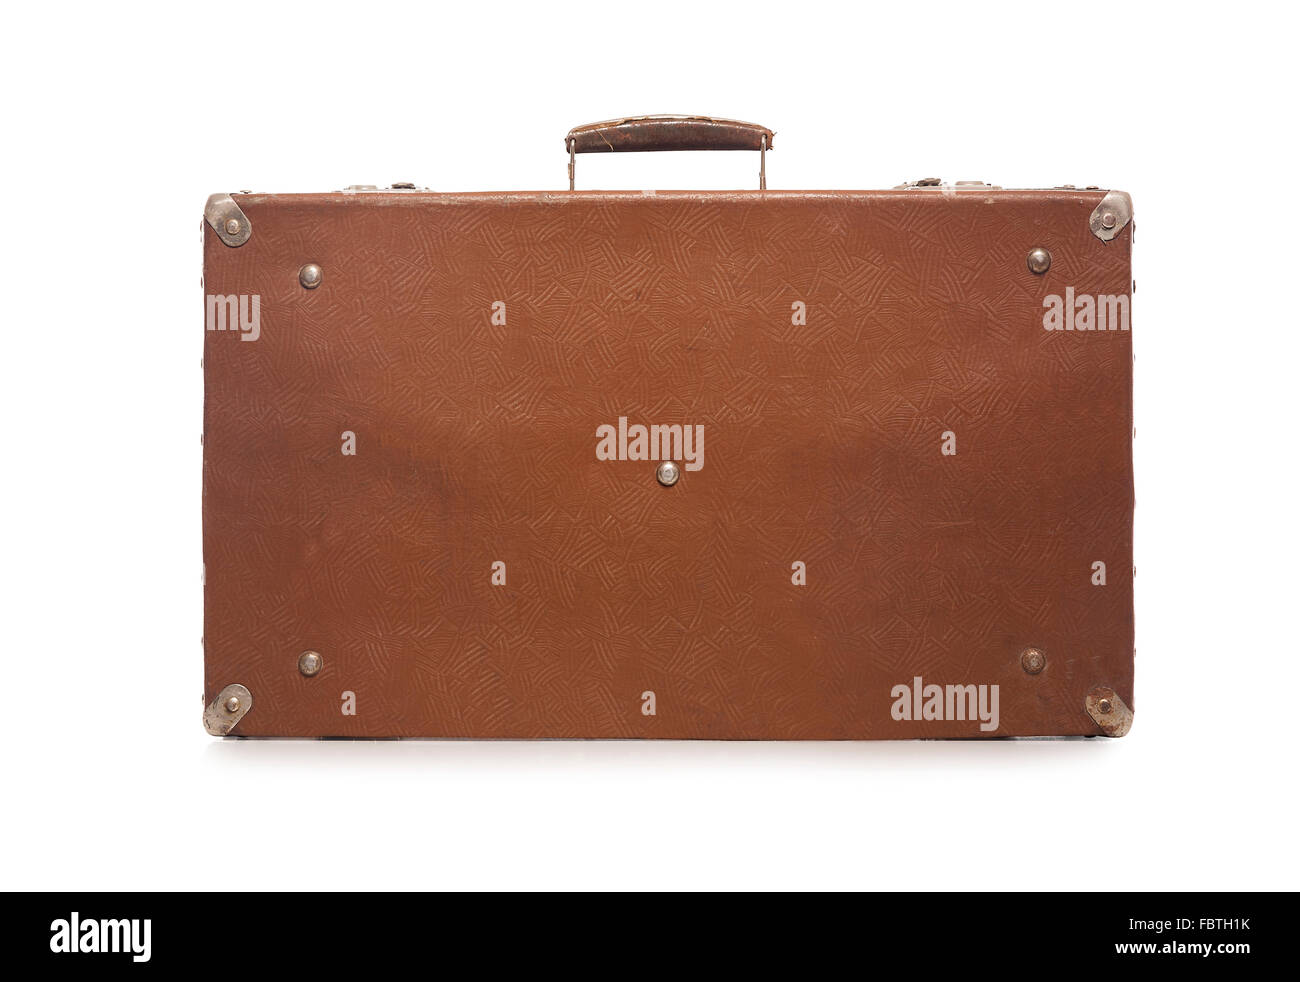 Empty suitcase Cut Out Stock Images & Pictures - Alamy